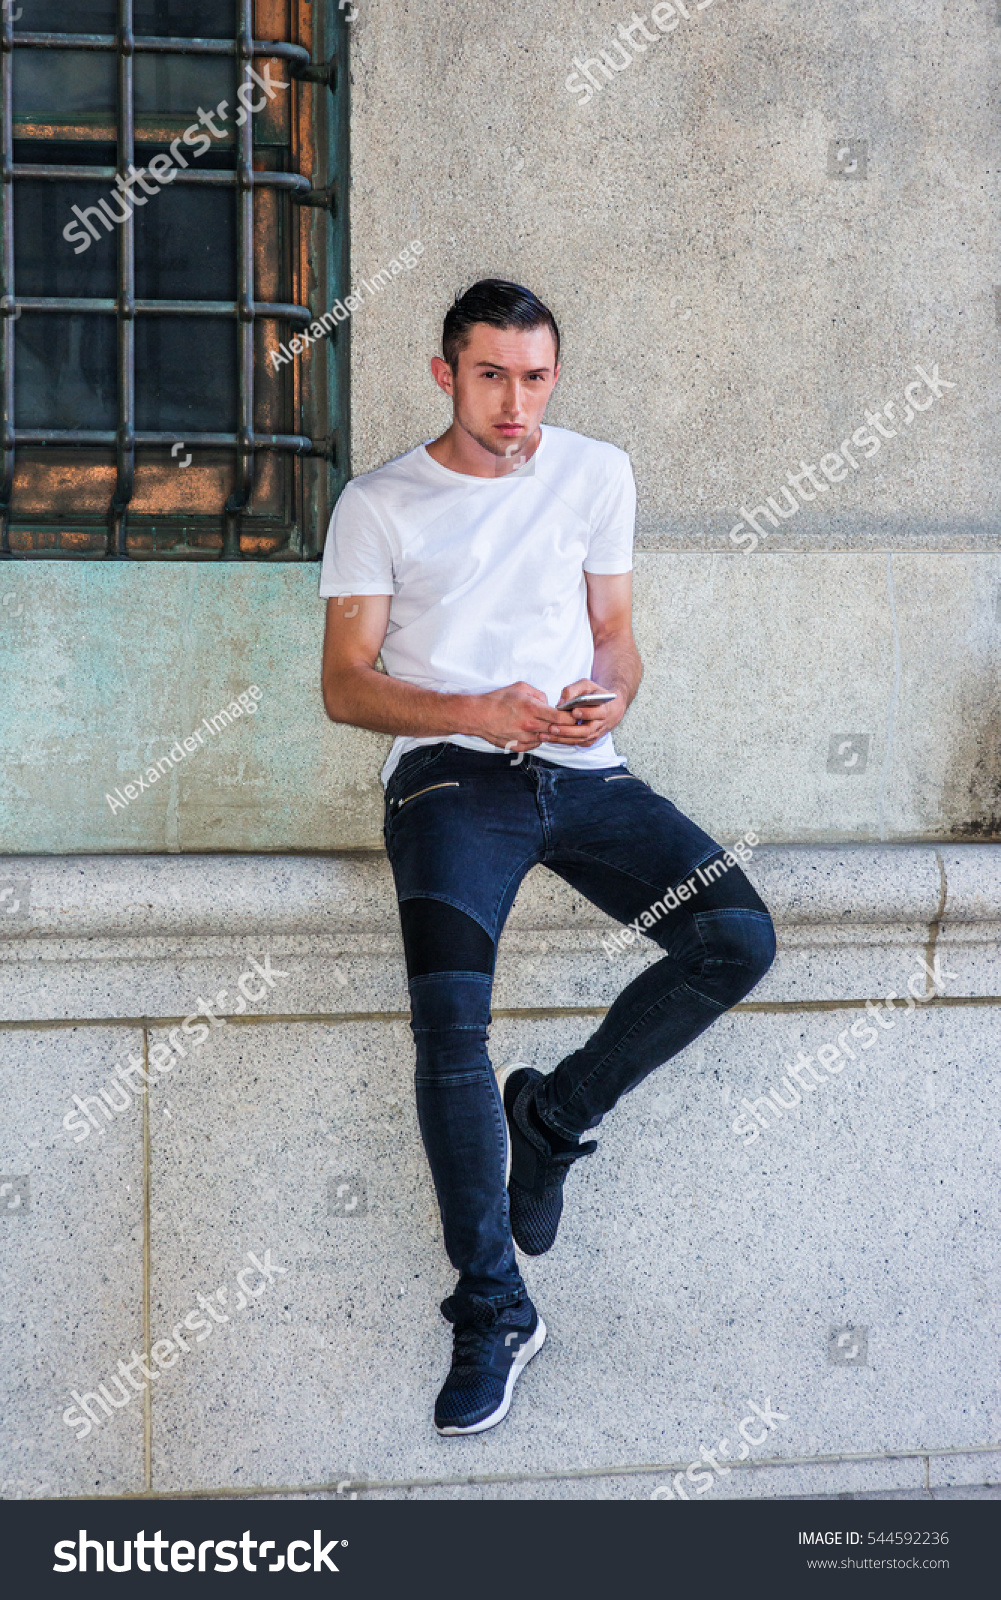 white shirt and black jeans male